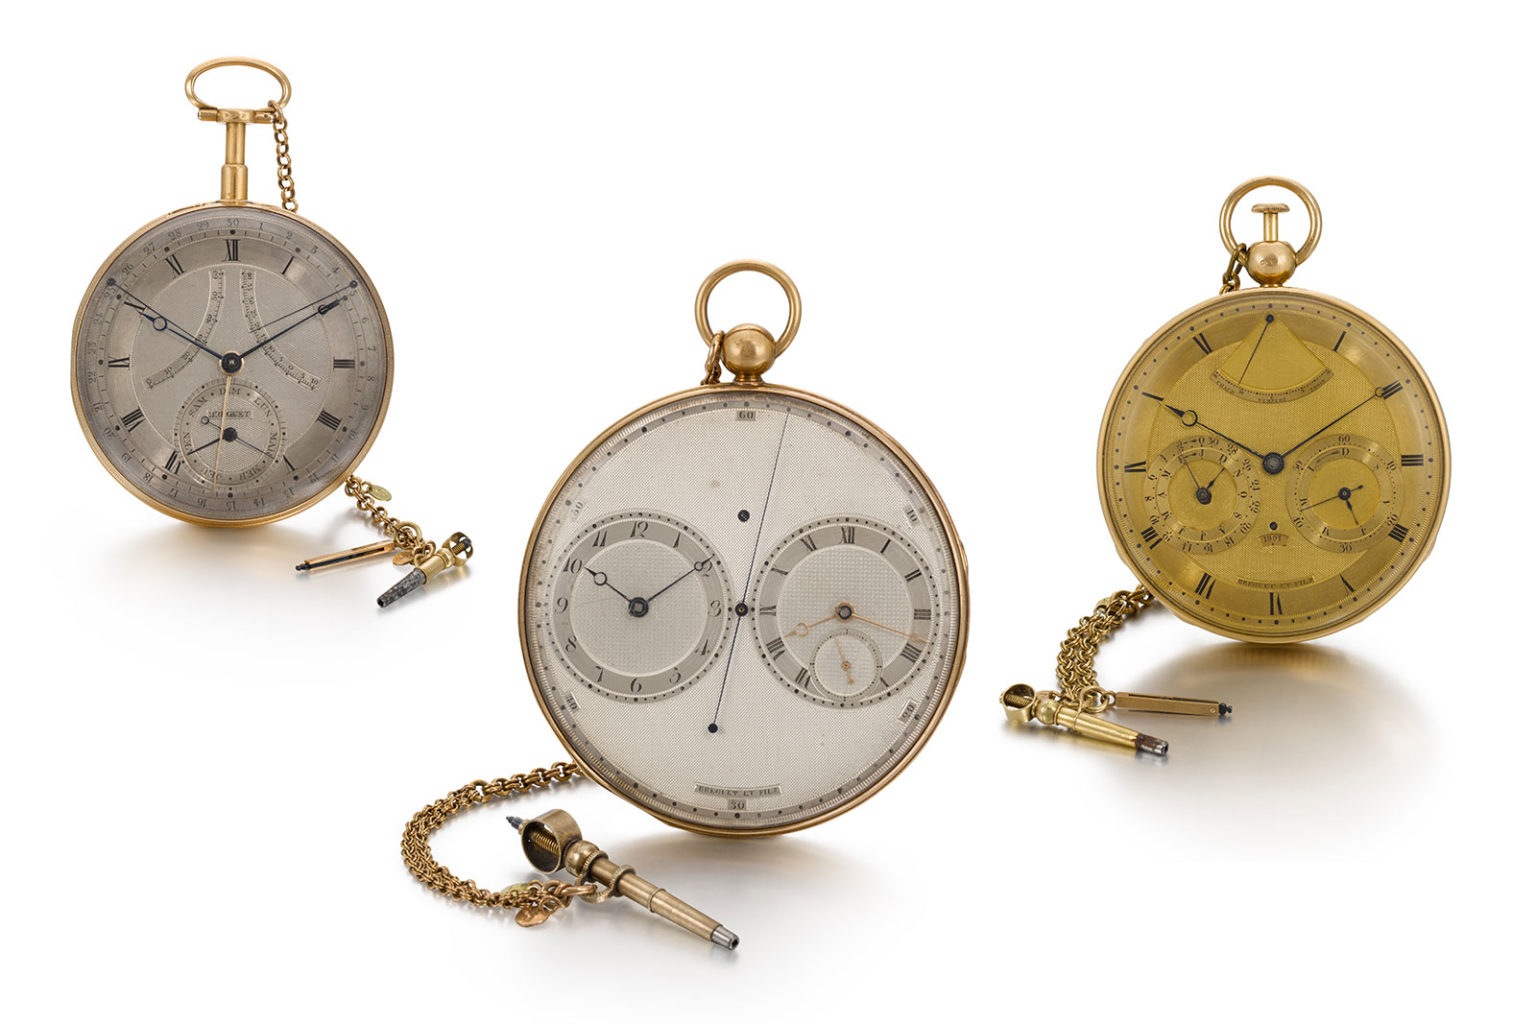 Auction Watch Sotheby’s to Sell Legendary, Royal Breguet Pocket